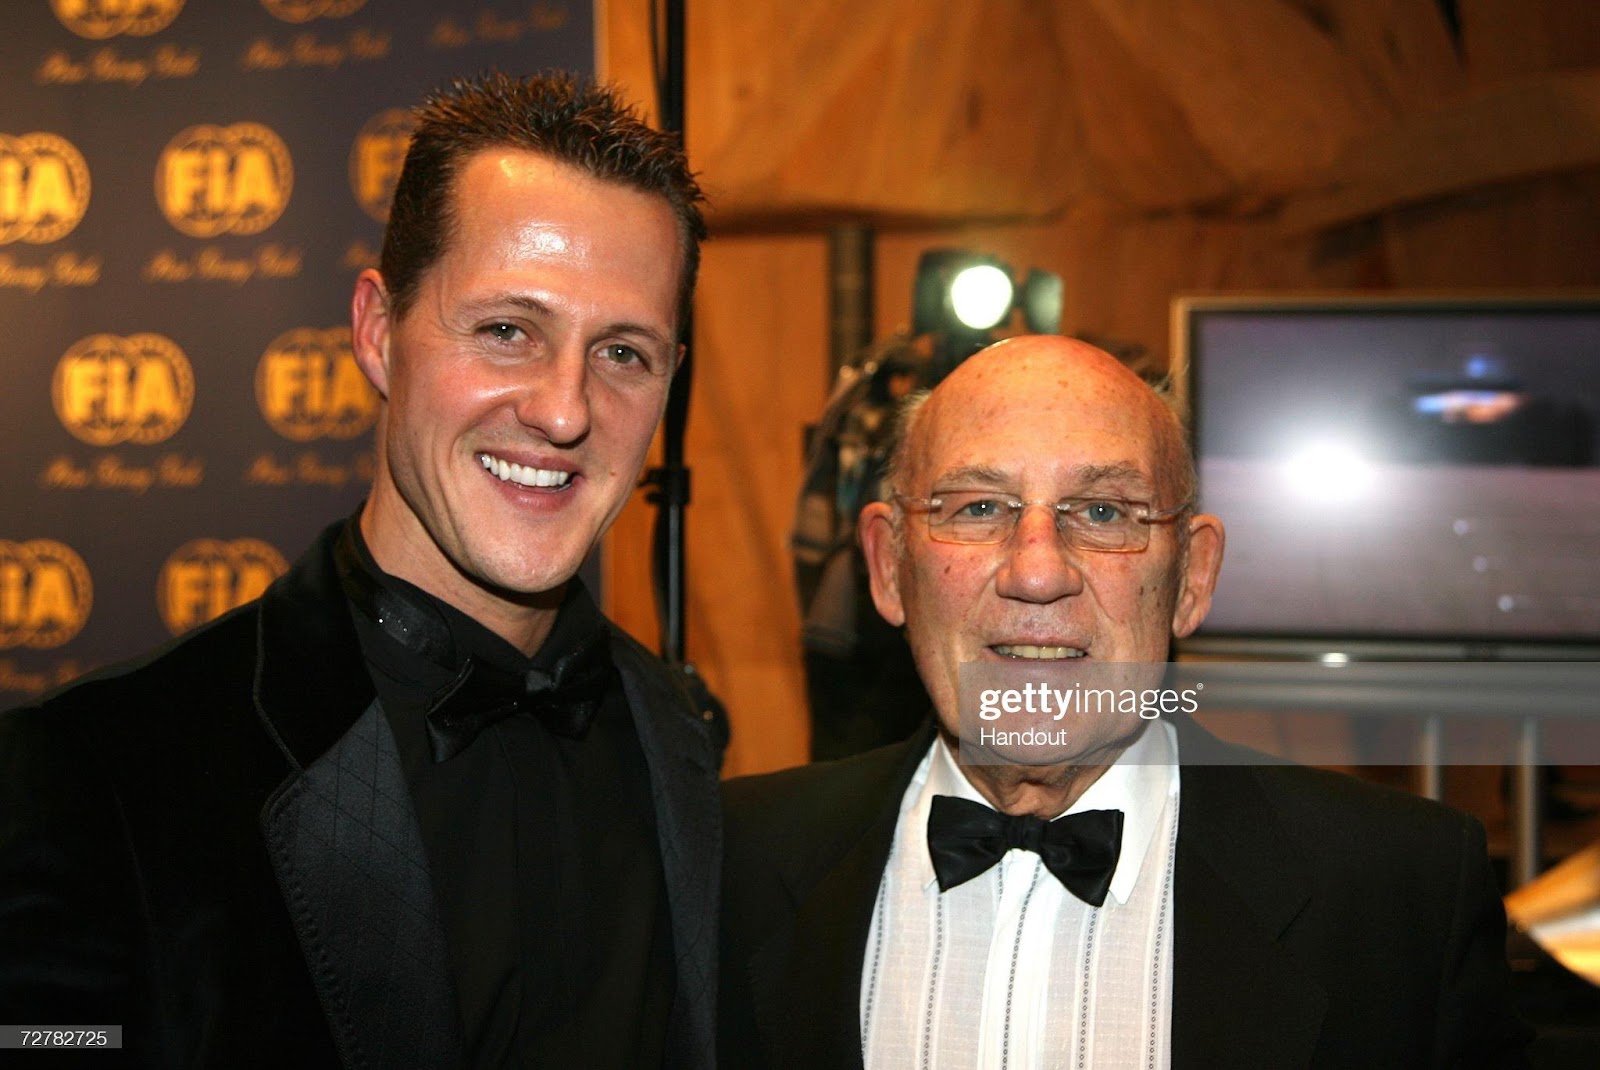 Michael Schumacher and Sir Stirling Moss attend the 2006 FIA Gala Prize Giving Ceremony held at the Salle des Etoiles Sporting Club on December 8, 2006 in Monte Carlo, Monaco.